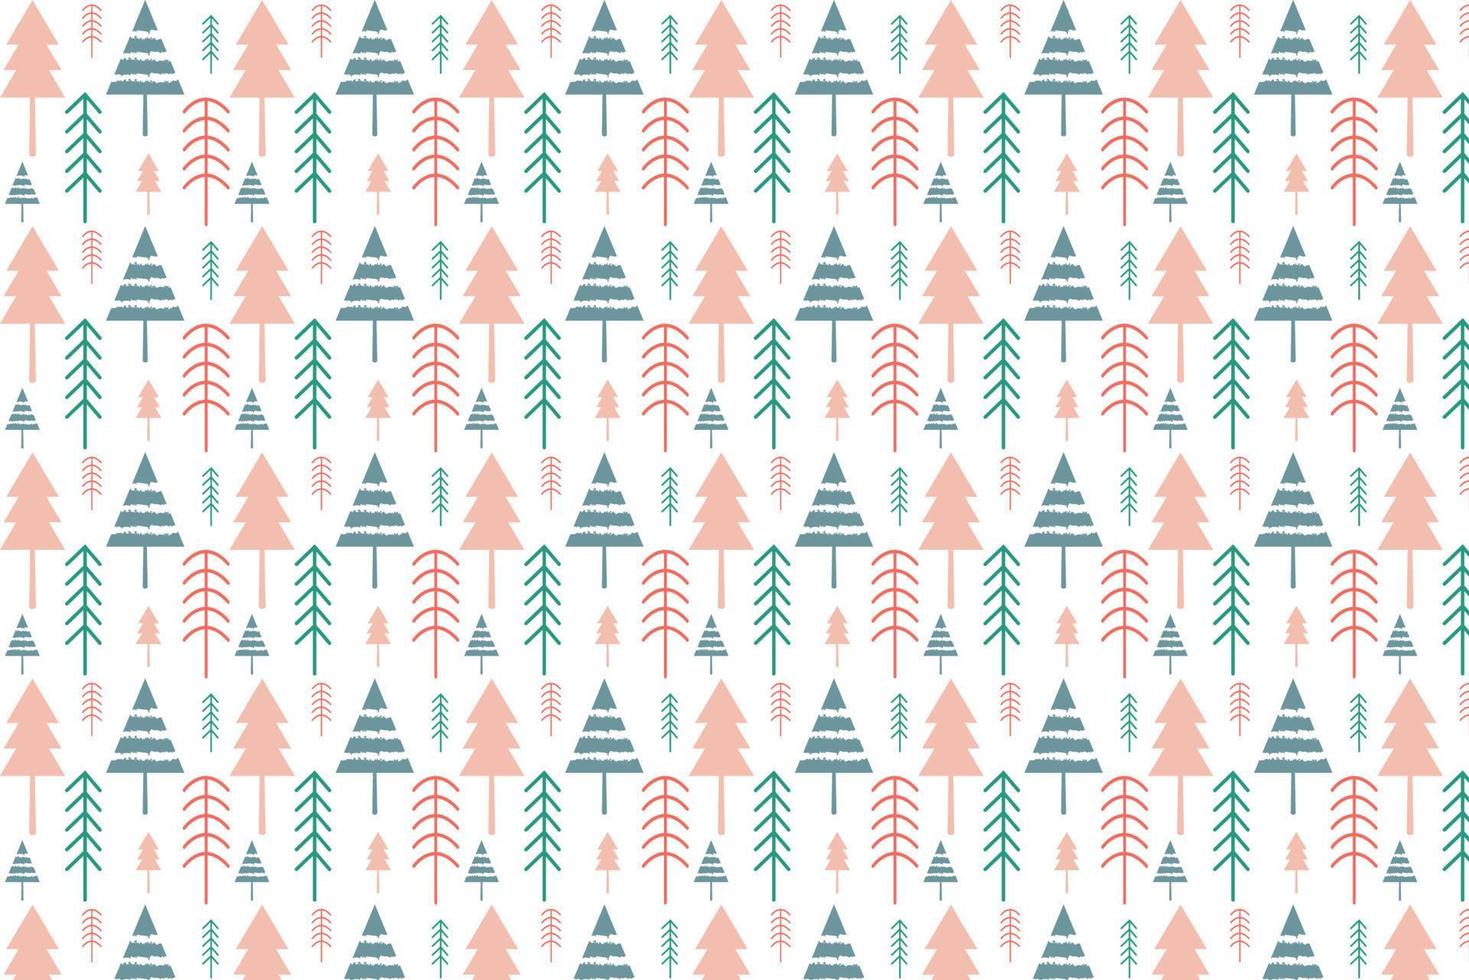 Simple Christmas seamless pattern with geometric motifs. Snowflakes and circles with different ornaments. Magic nature fantasy snowfall texture decoration design vector